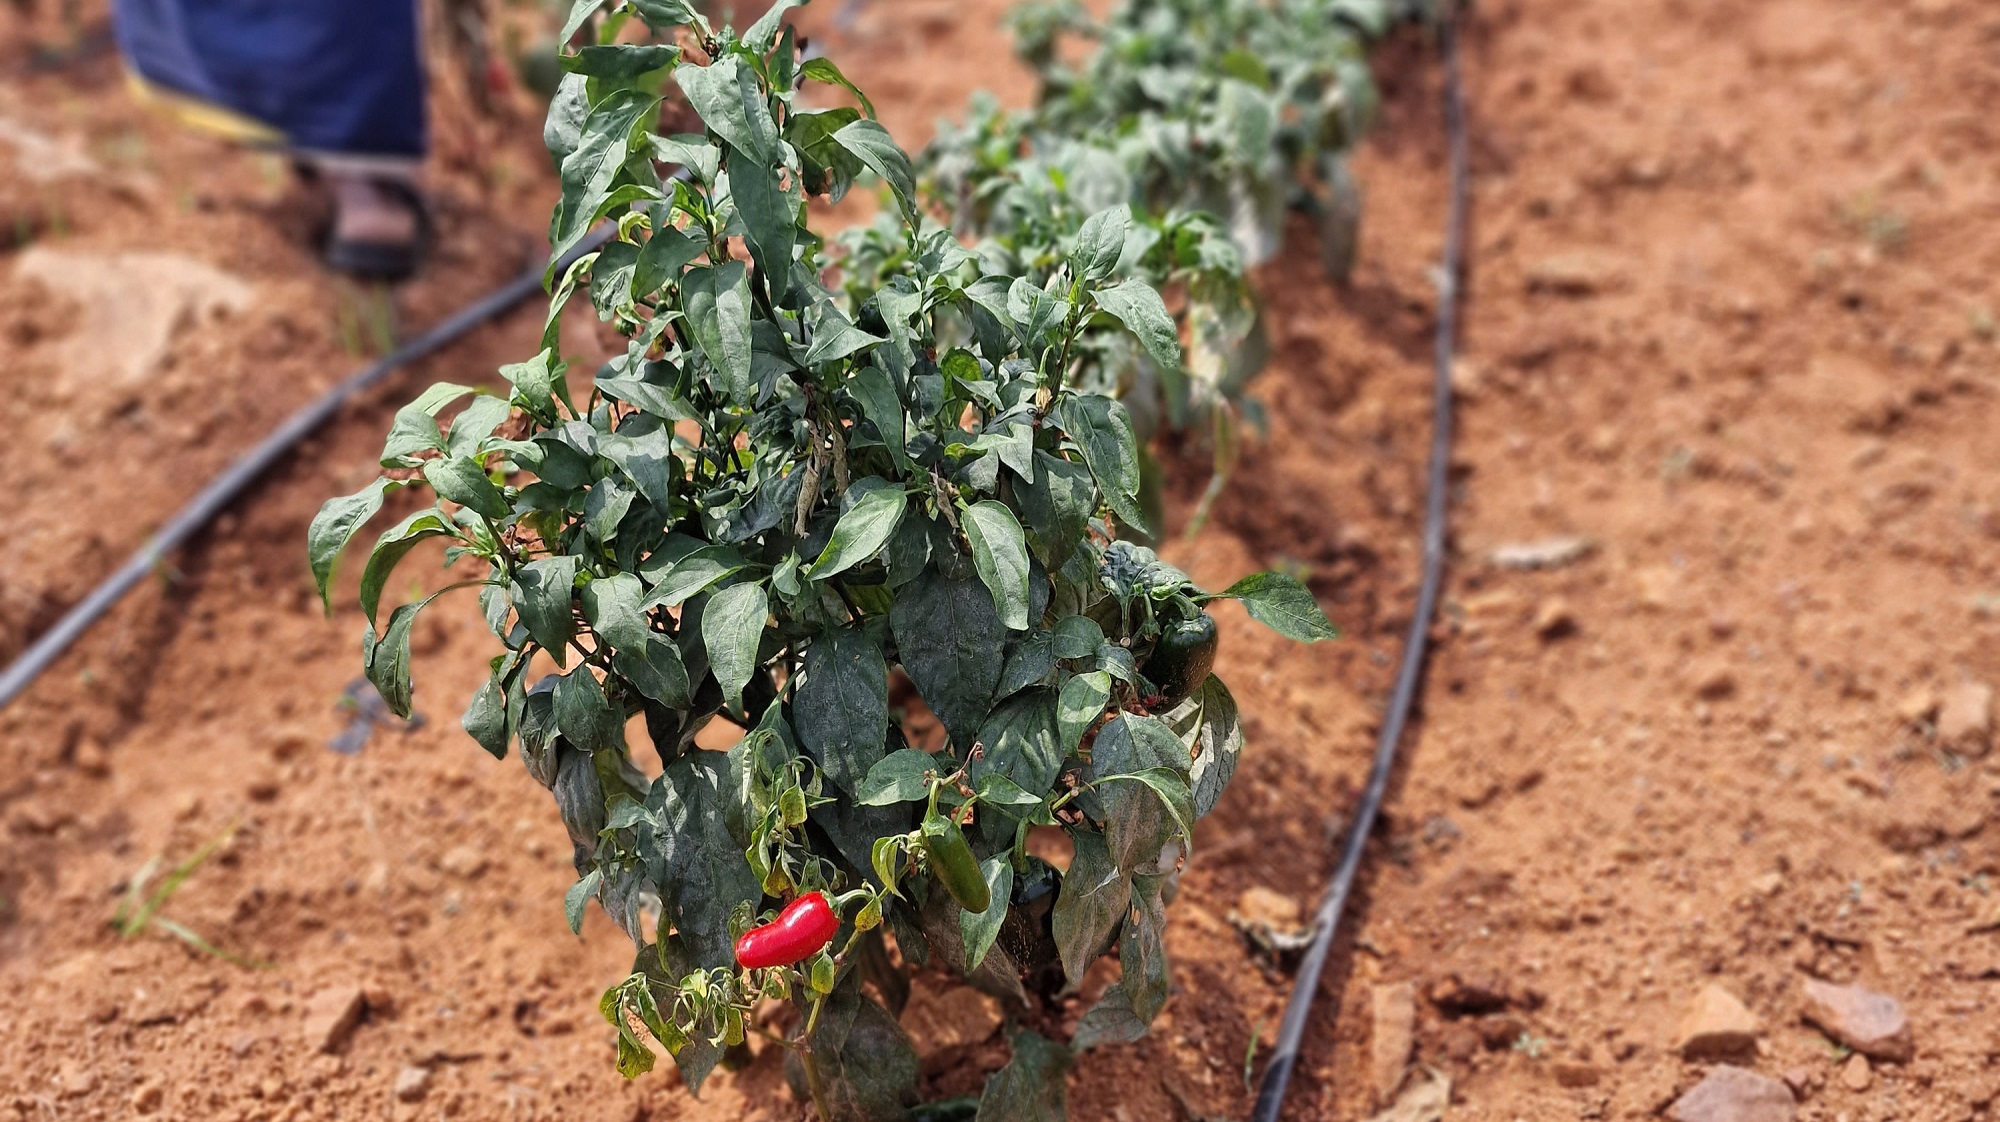 Micro irrigation saves the humus layer, stores carbon dioxide and thus stops climate change